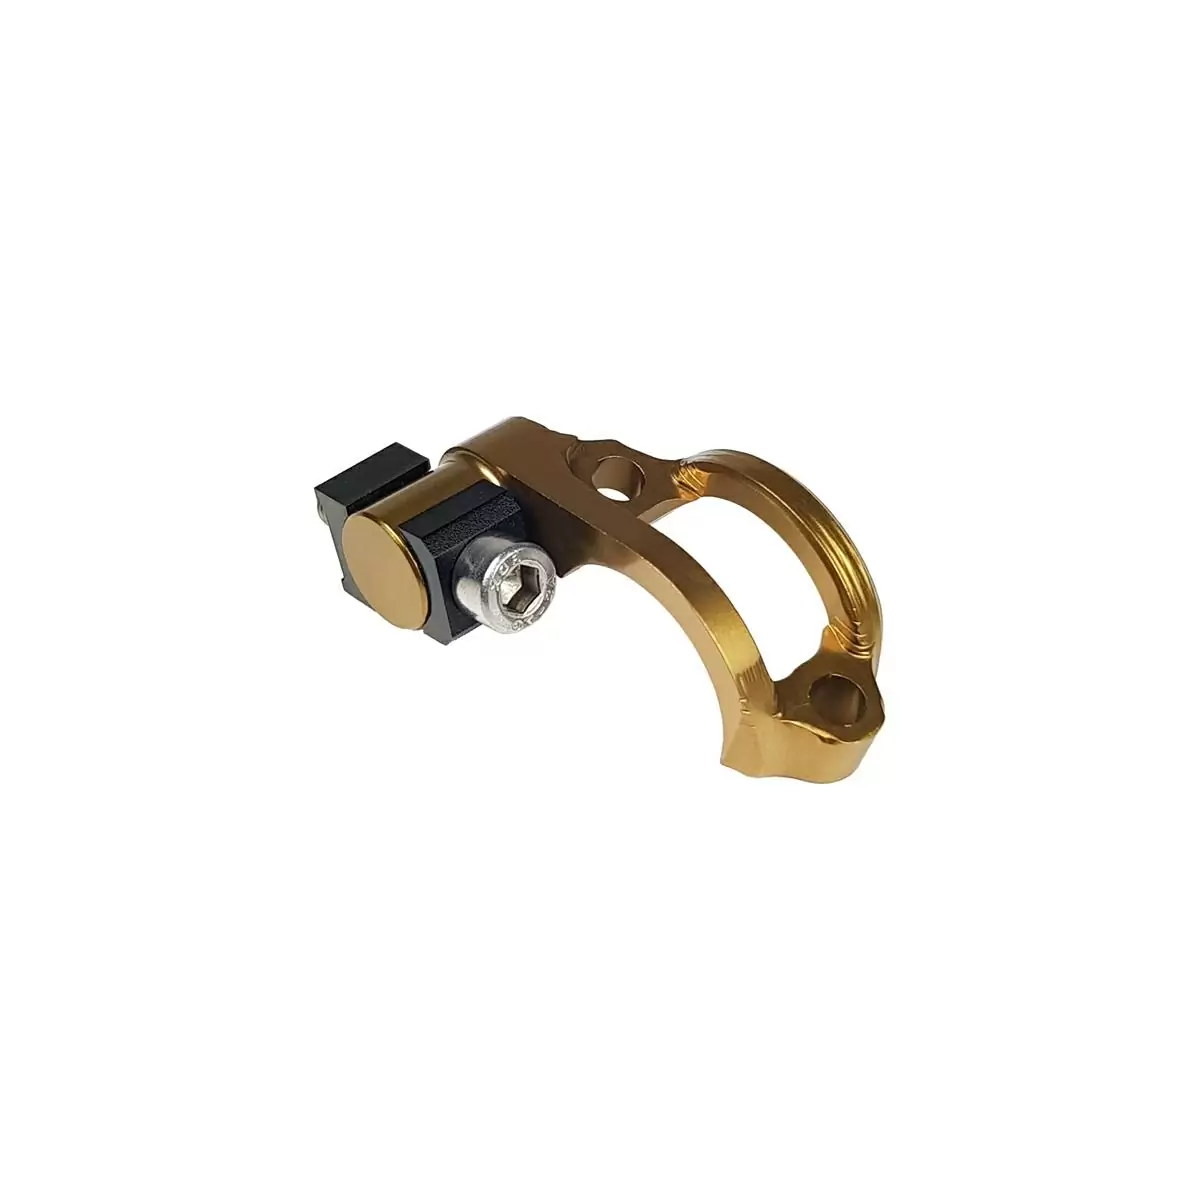 Left matchmaker for INCAS brakes compatible with Sram #2